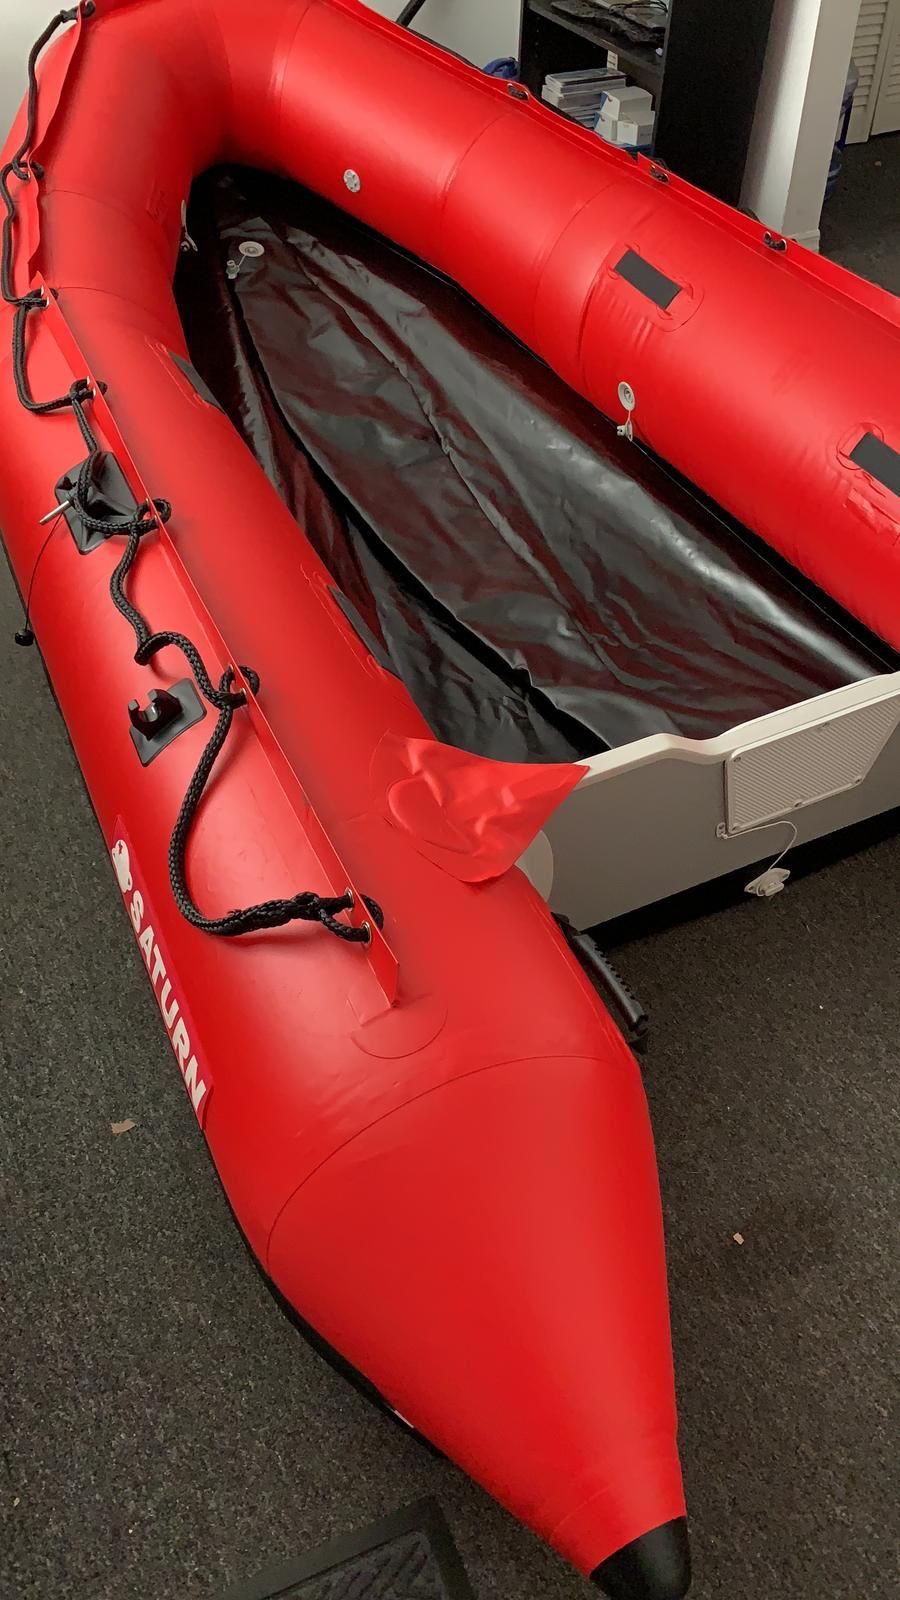 Saturn inflatable boat SD365 12’ red (just tubes)